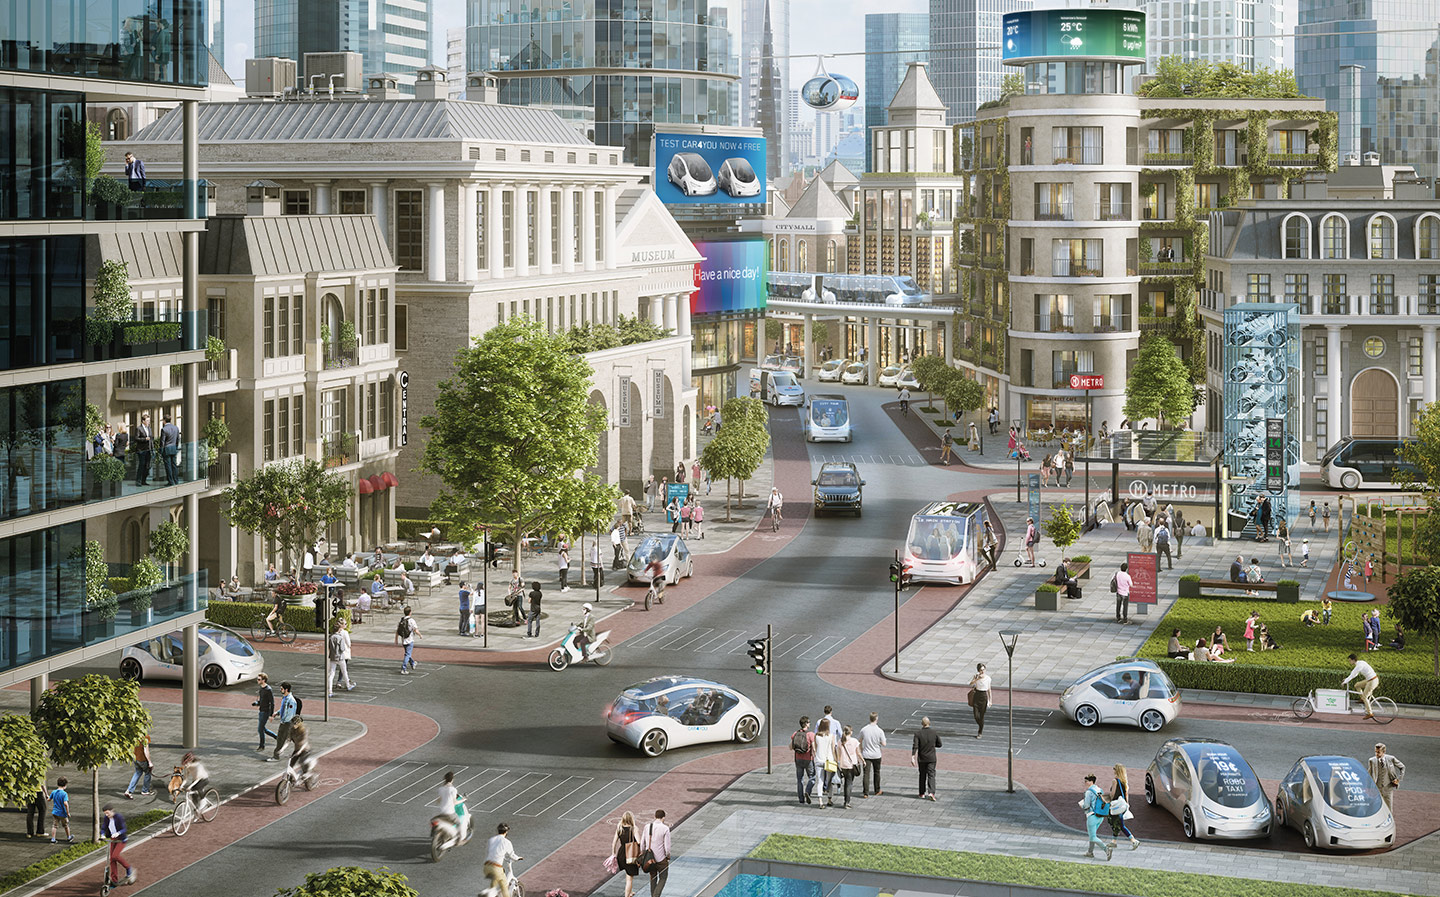 The Future of Transport: The co-pilot takes over with driverless cars